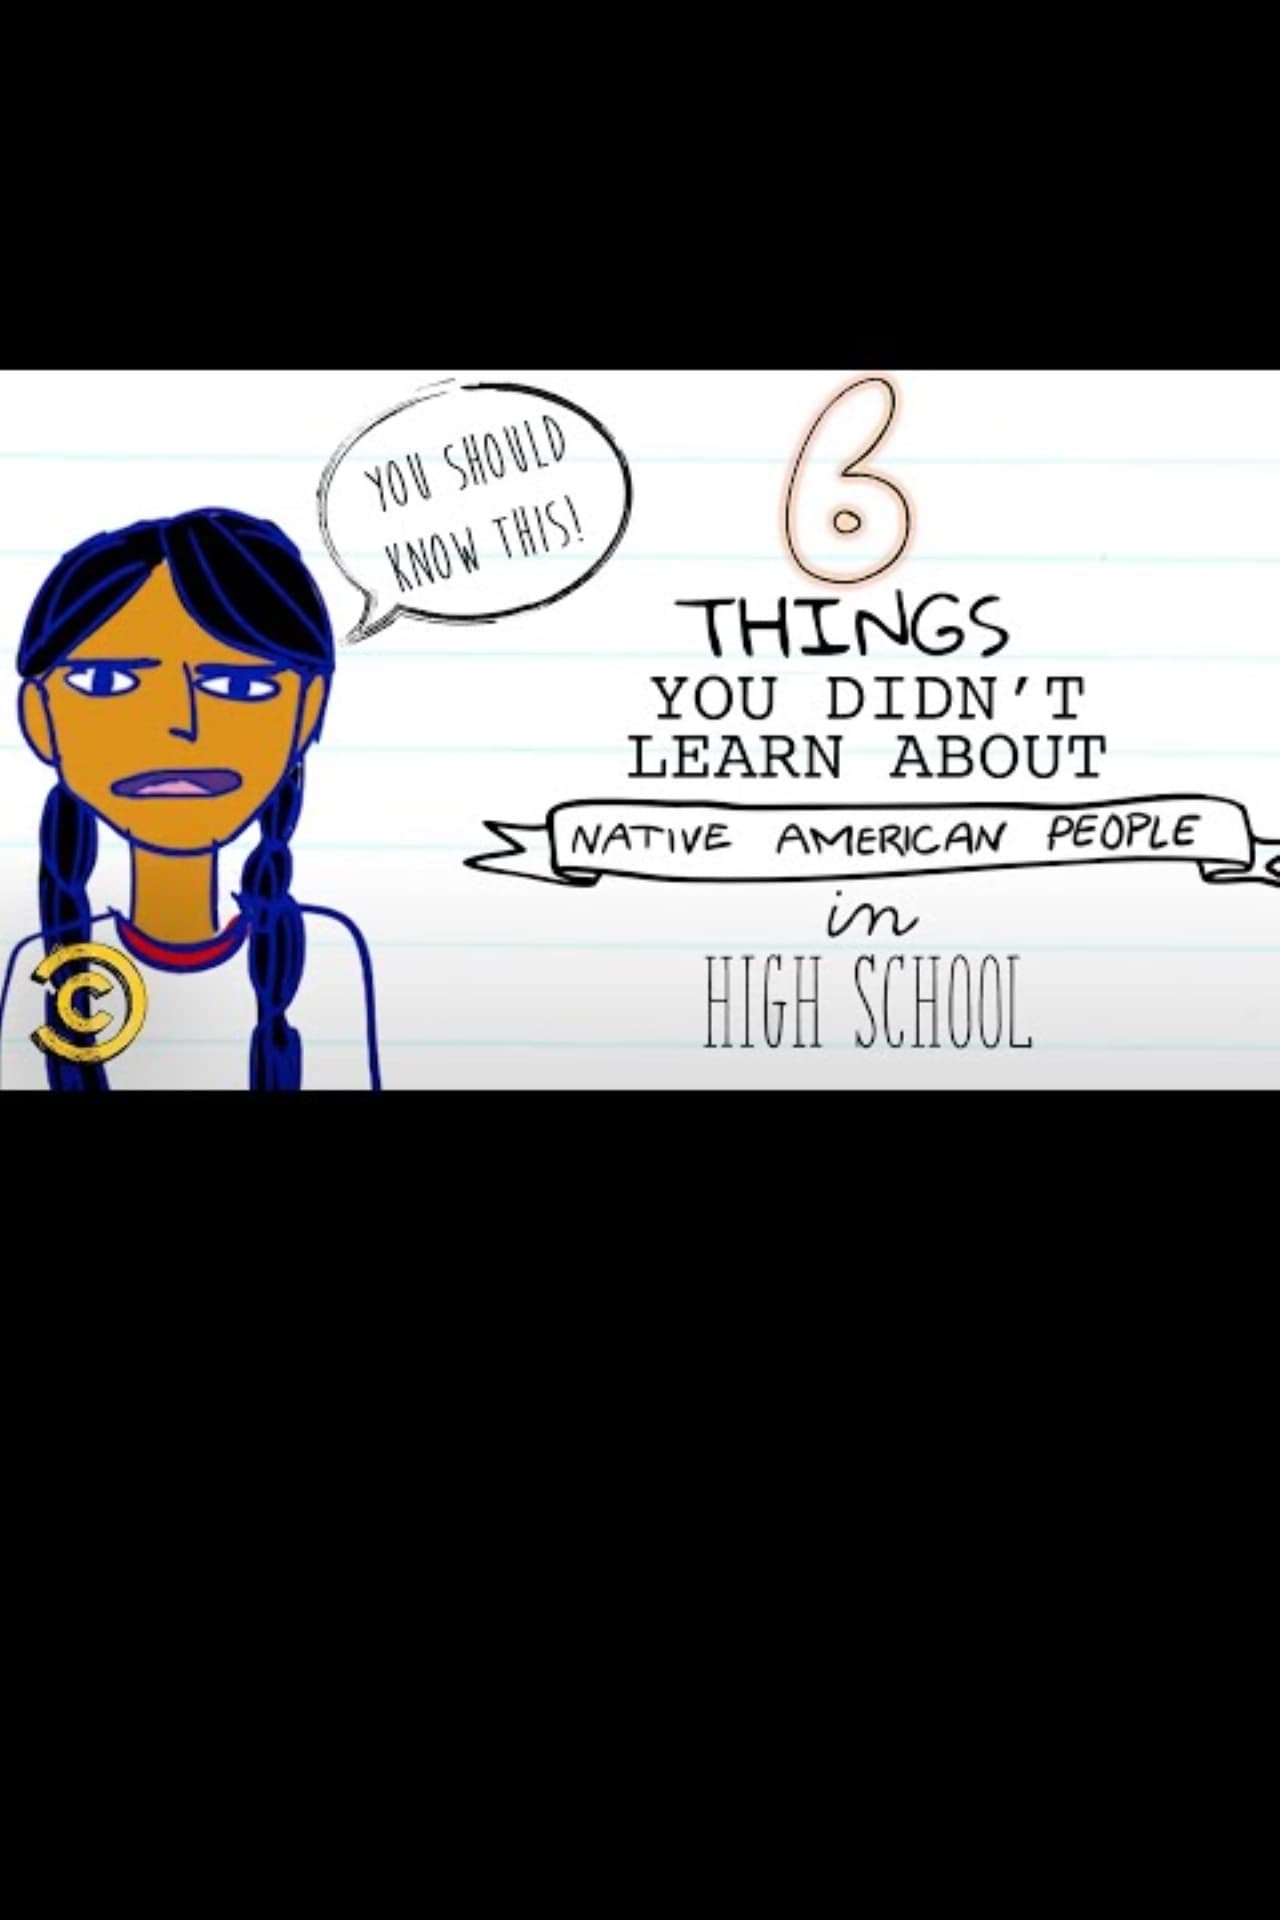 6 Things You Didn’t Learn about Native American People in High School